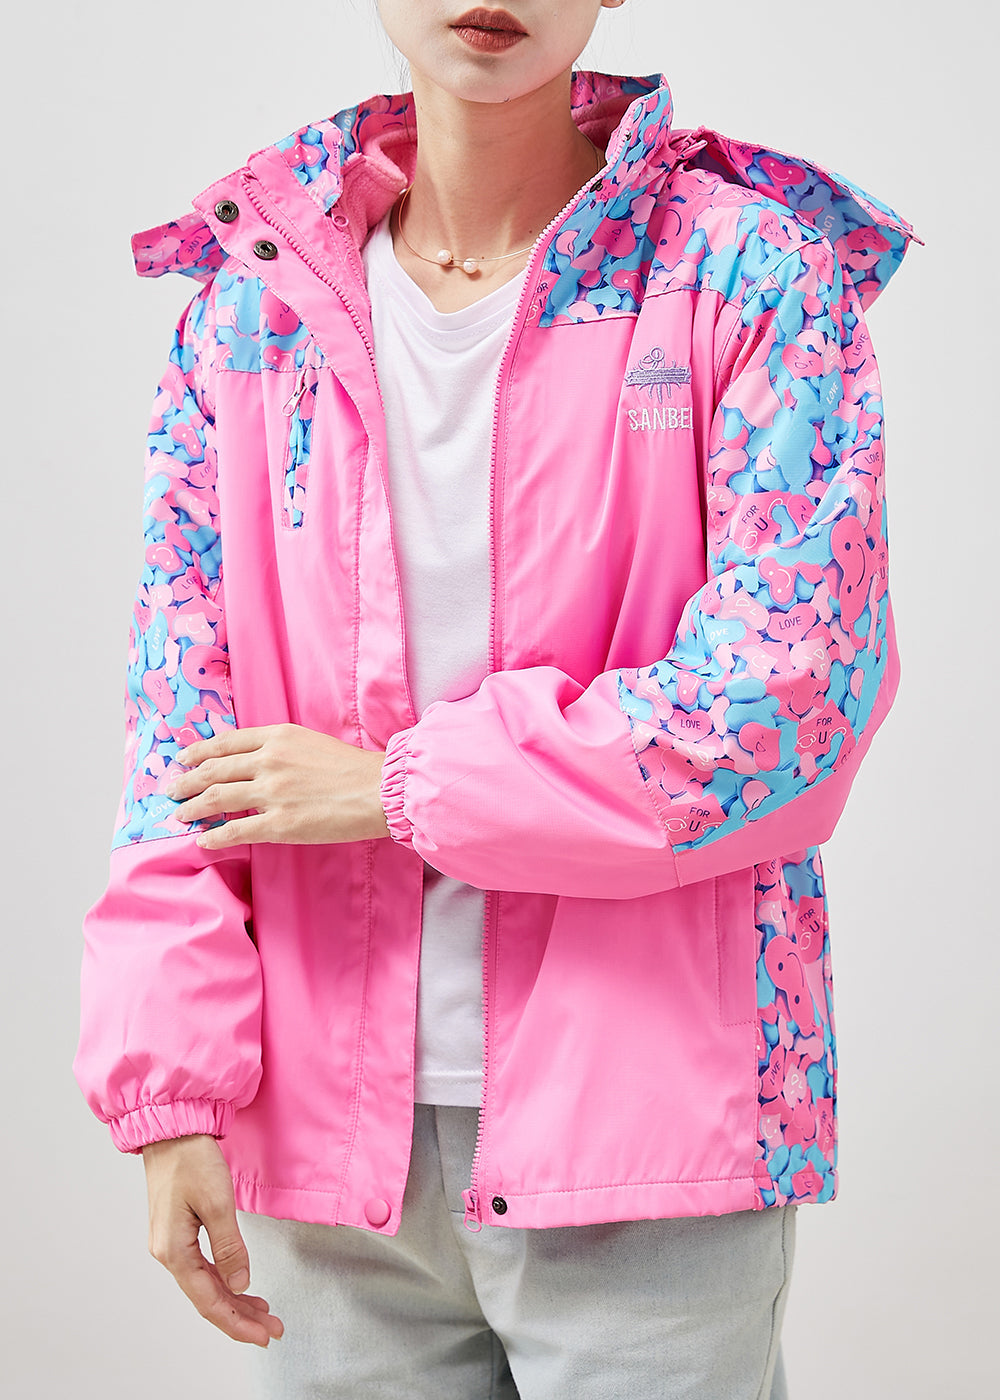 Chic Pink Hooded Patchwork Print Spandex Coat Outwear Fall